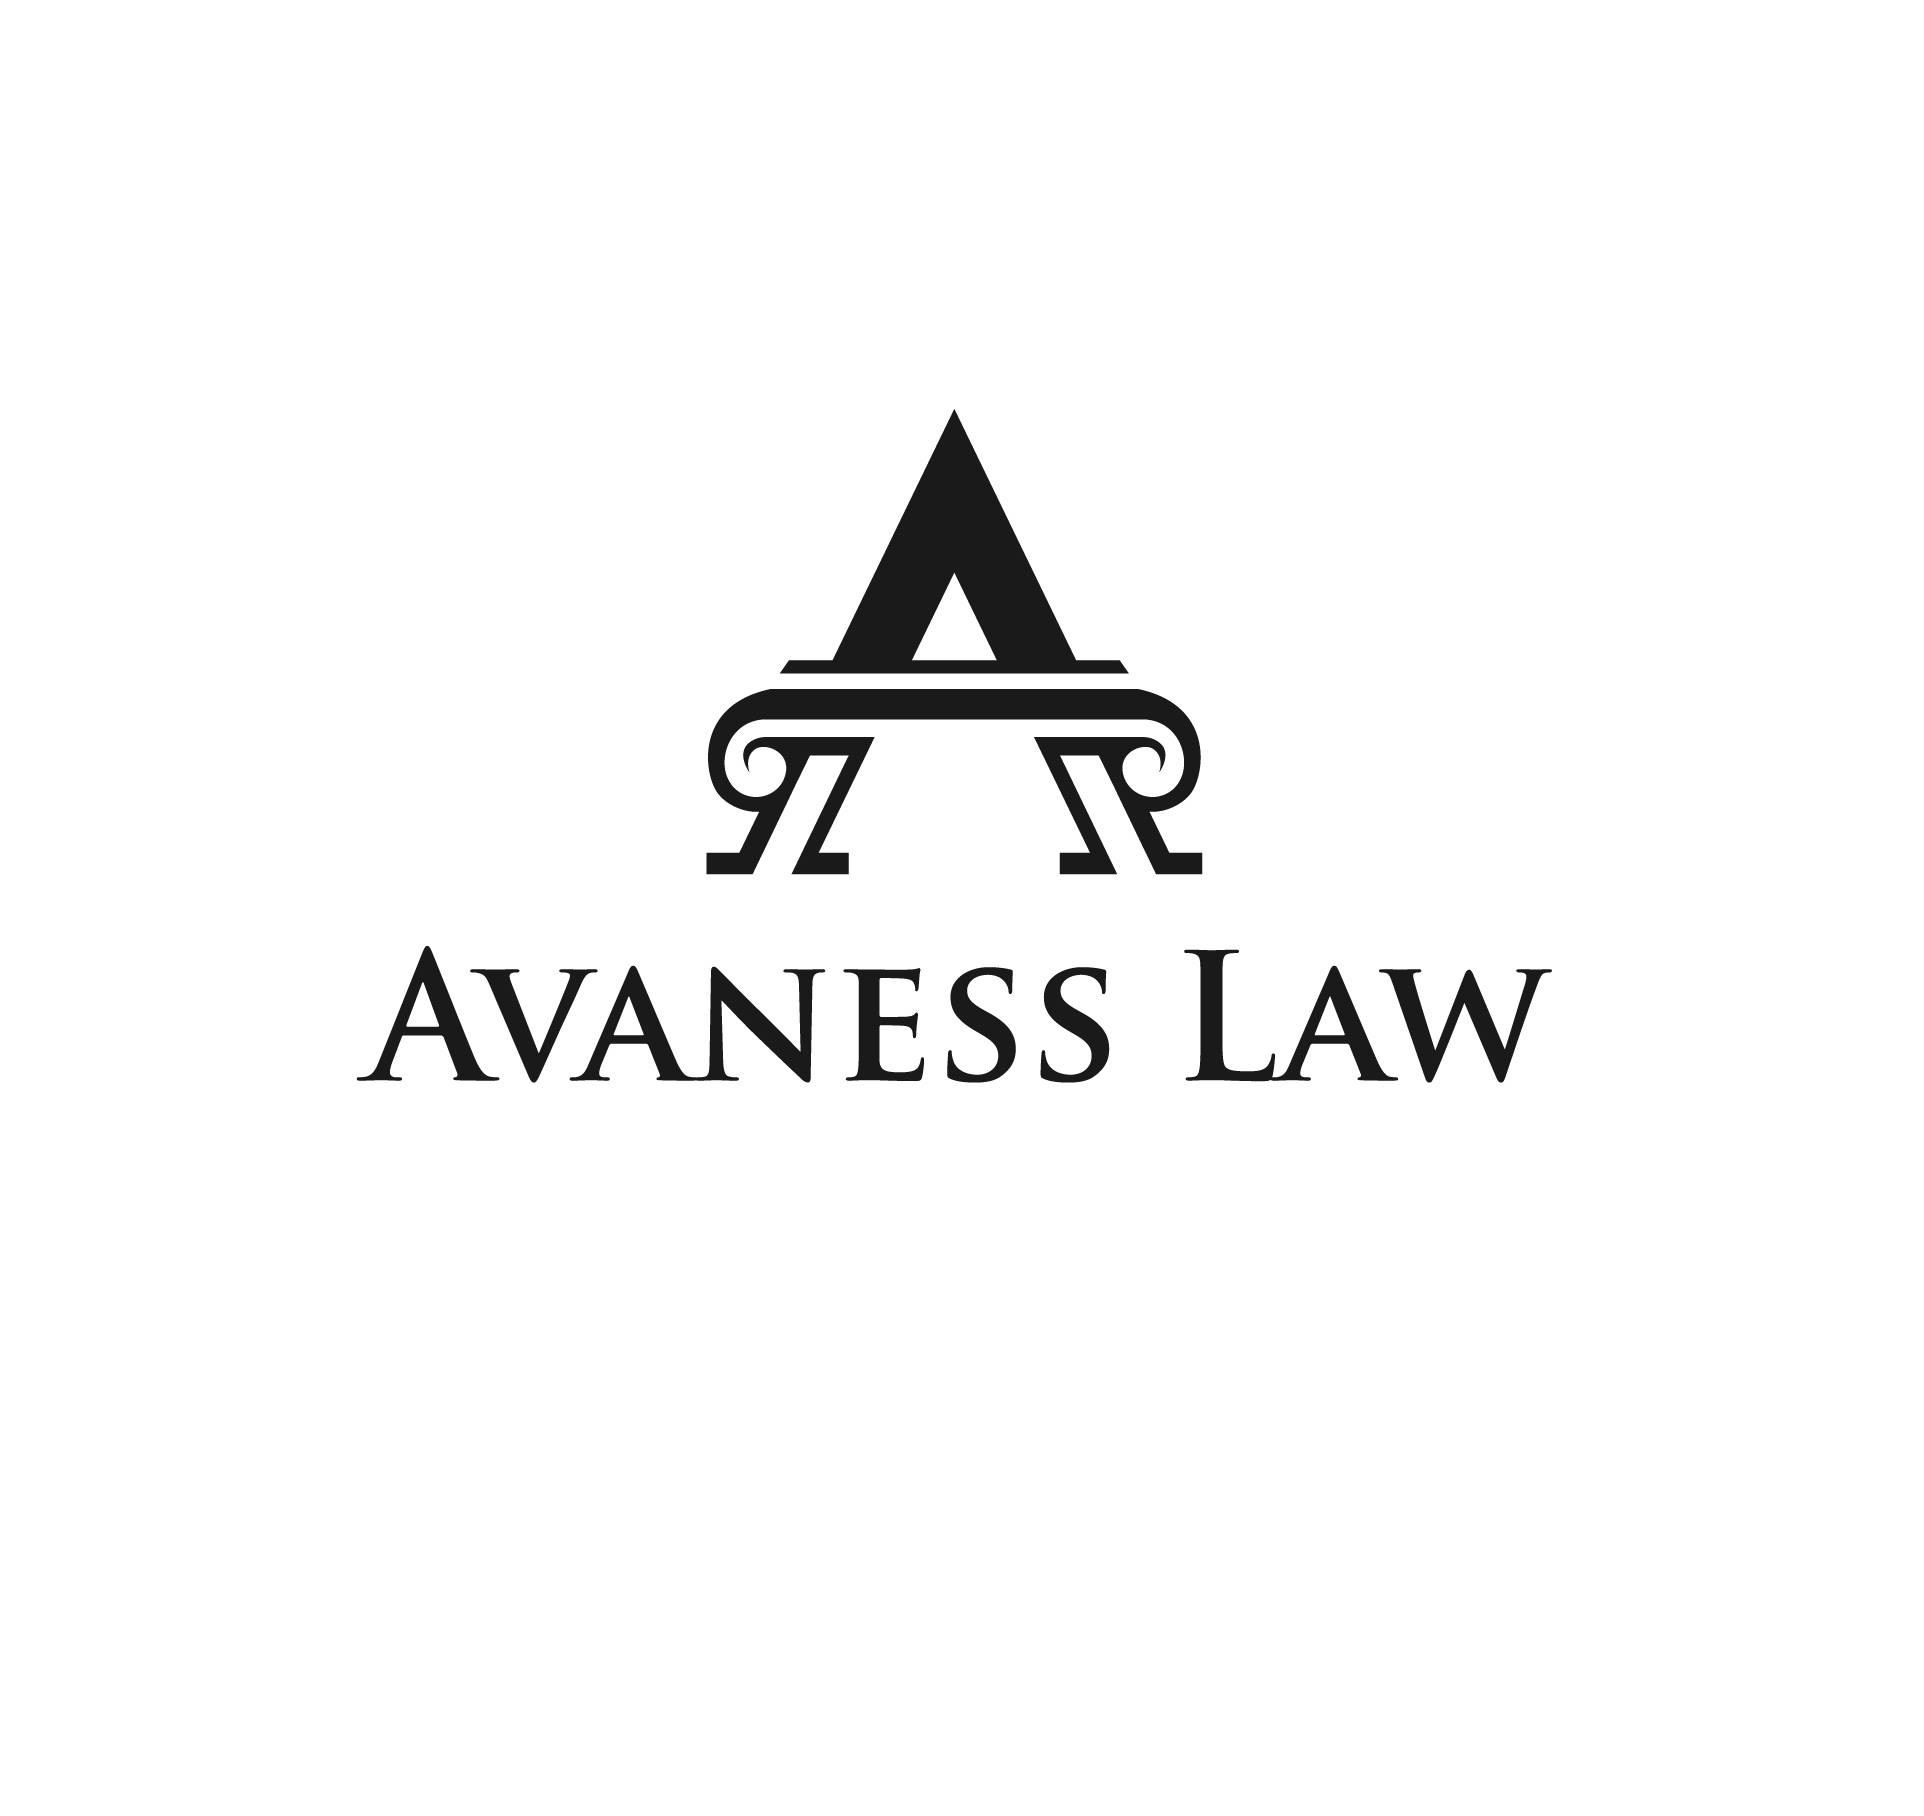 Avaness Law - Top Legal Firm